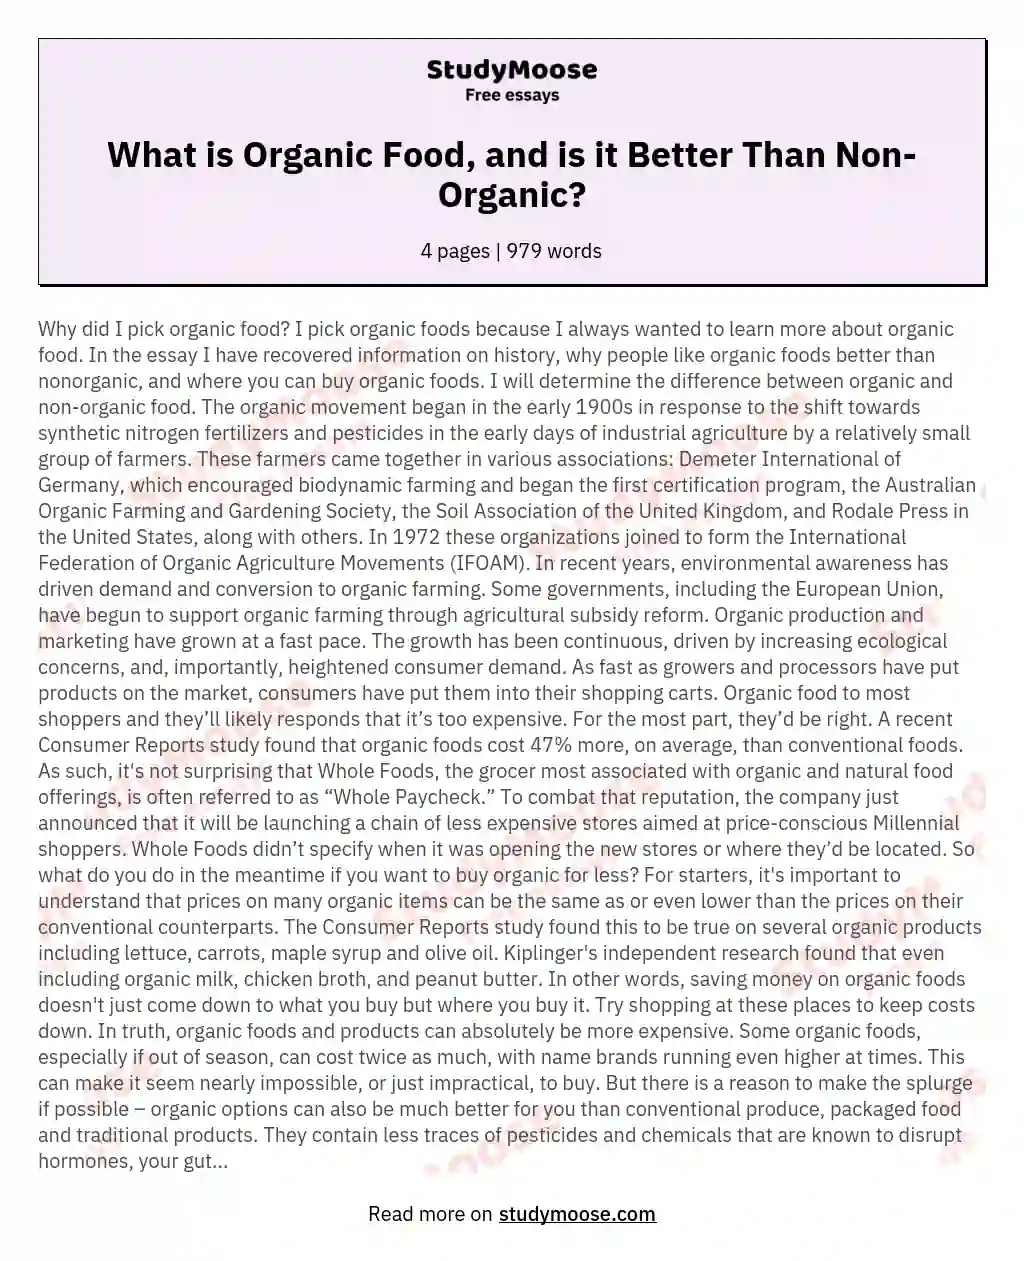 What is Organic Food, and is it Better Than Non-Organic? essay